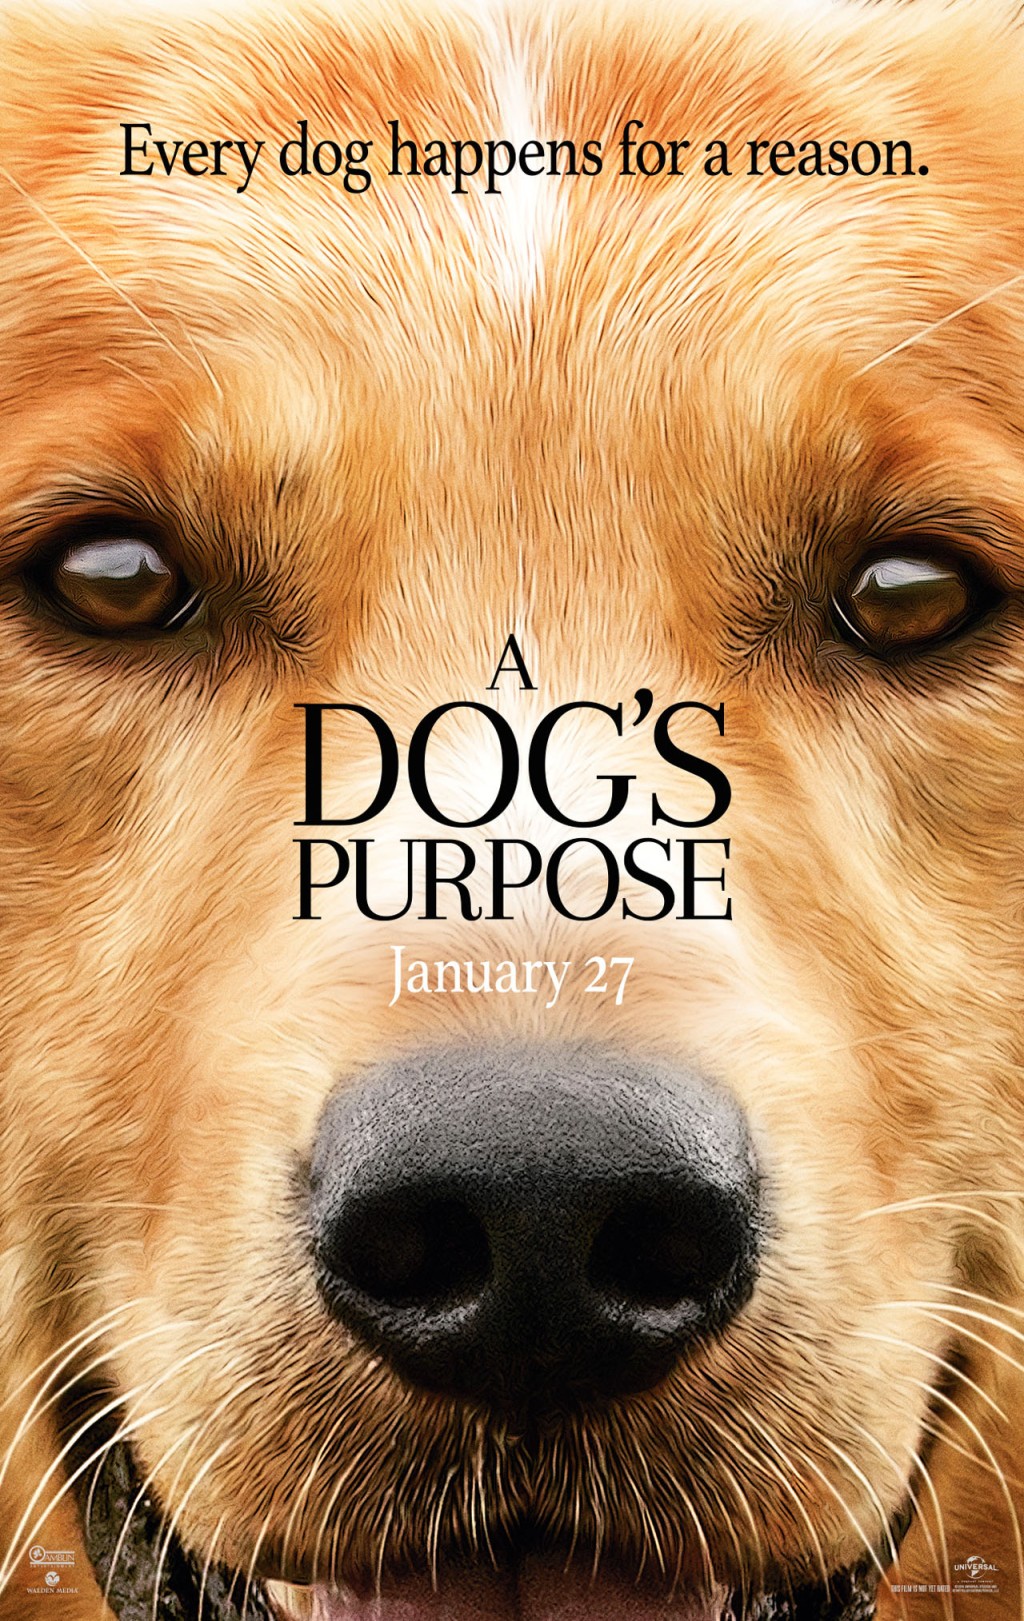 REVIEW – A Dog’s Purpose paws at straws, but is still kind of fun